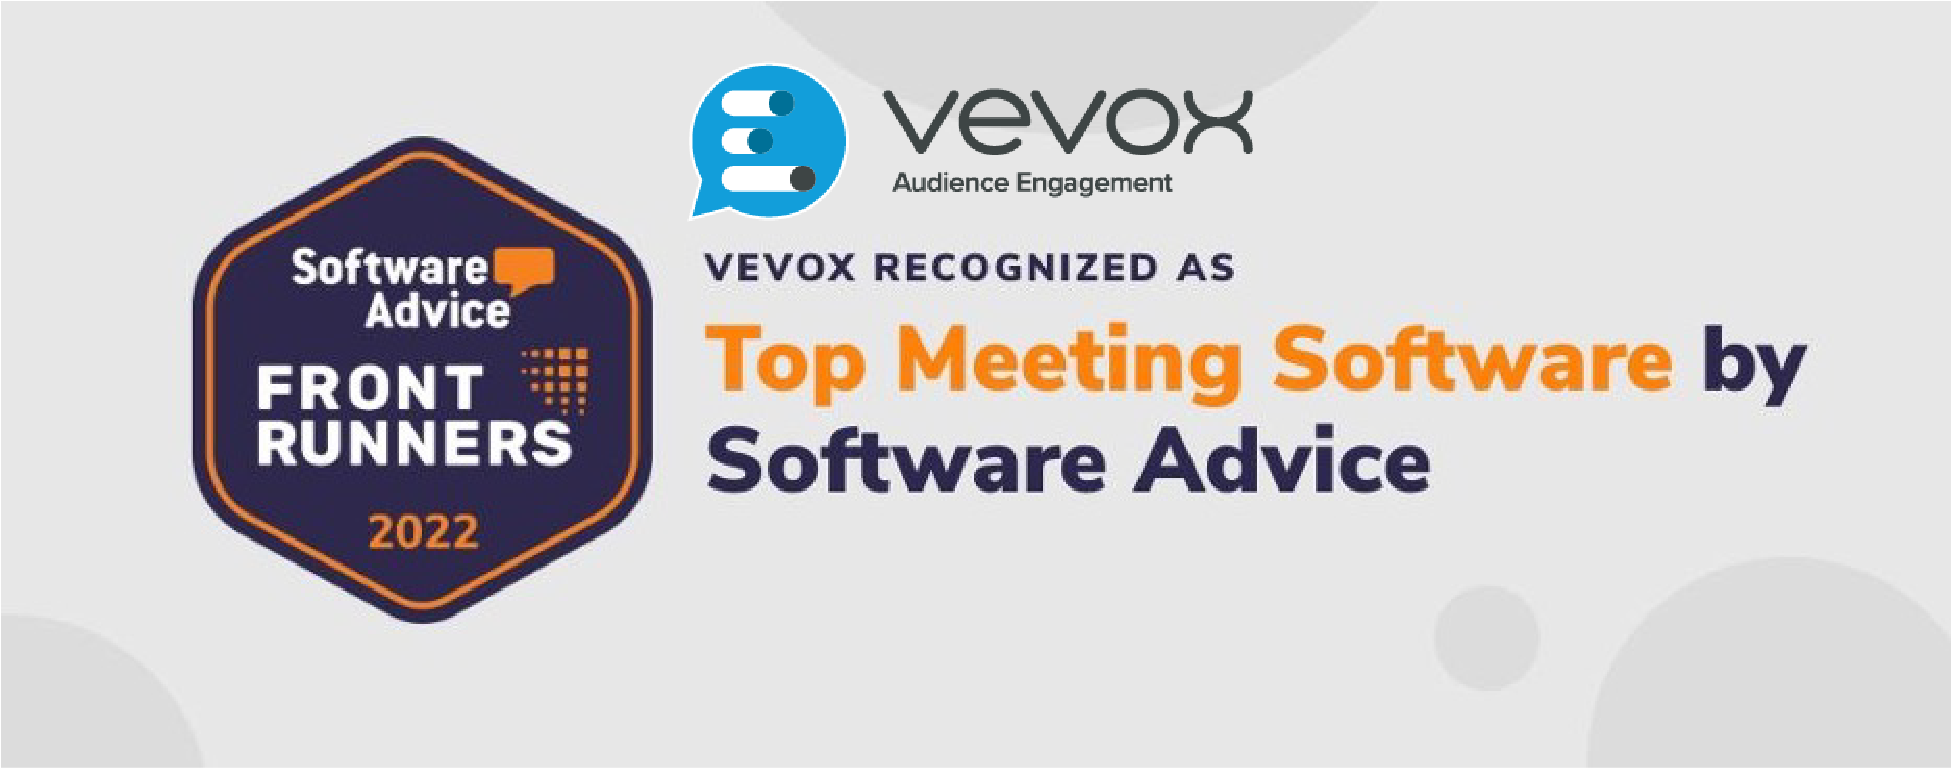 Vevox Recognised As Top Meeting Software & Frontrunner in 2022